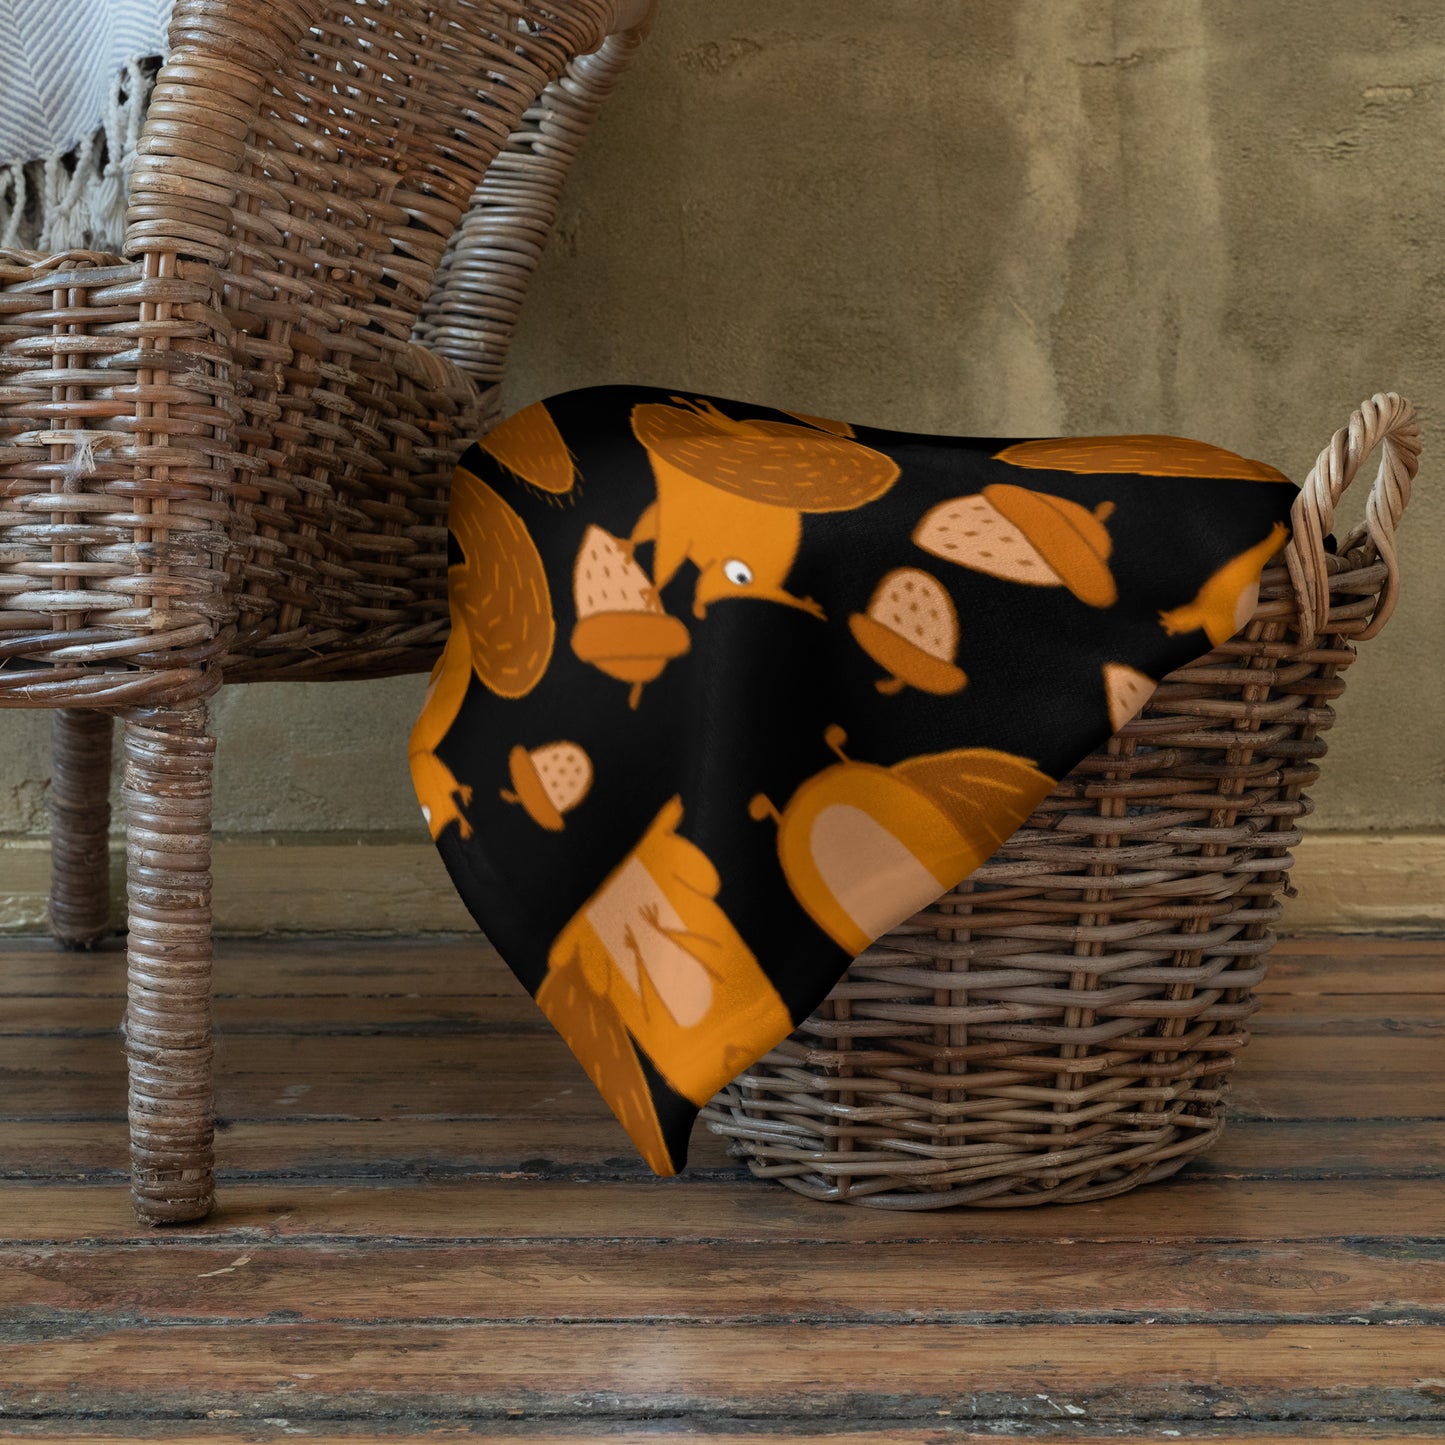 Throw blanket black color with funny orange squirrels and nuts in basket